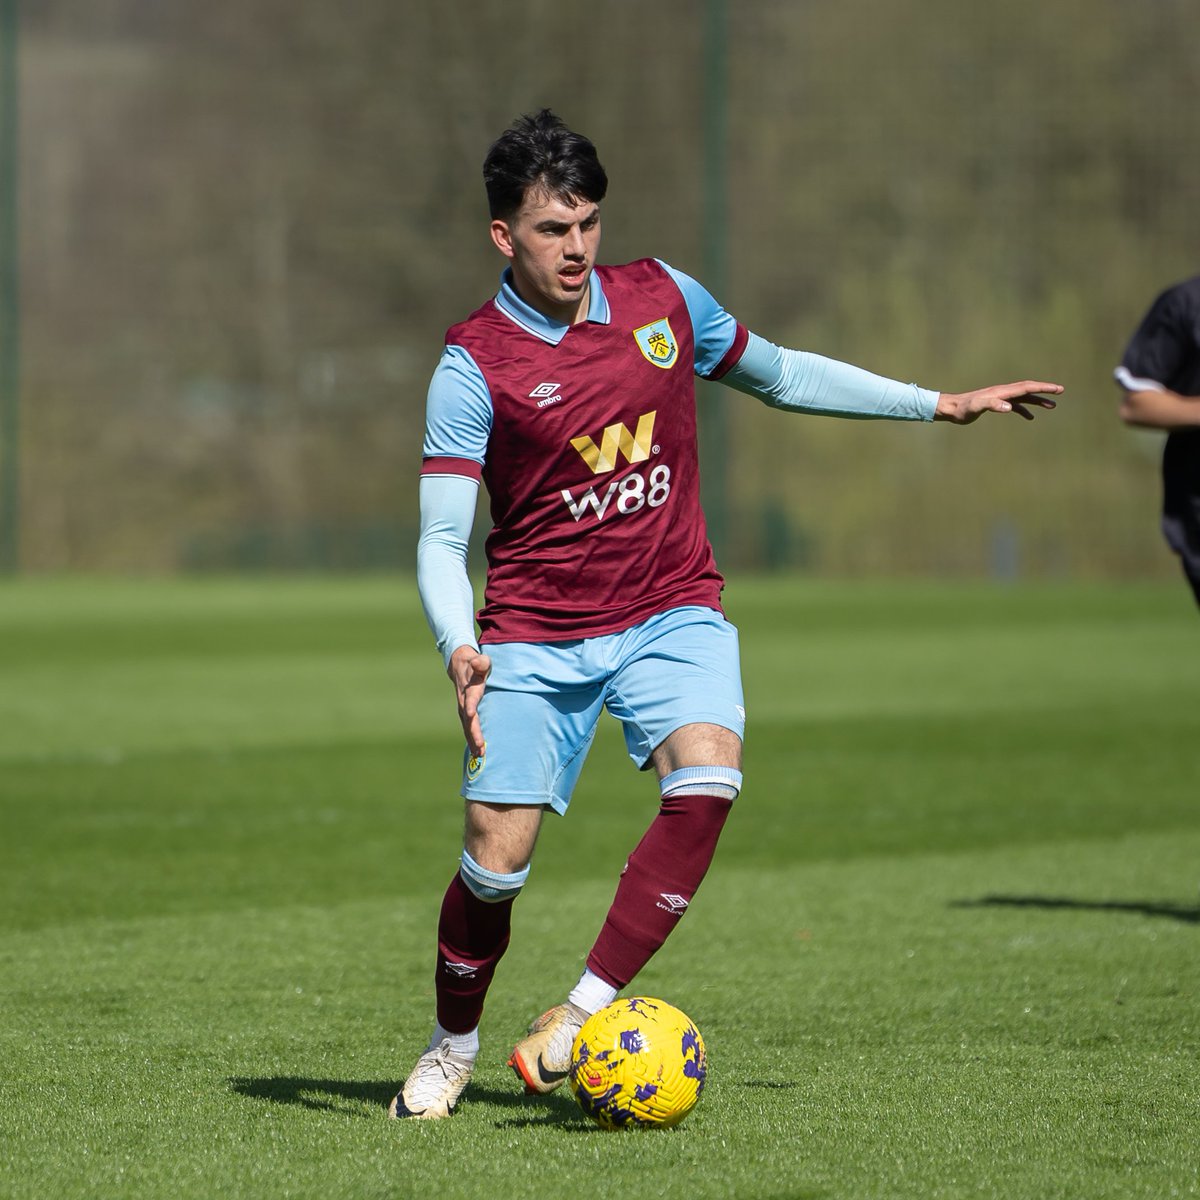 A Tommy McDermott penalty and a late Tom Tweedy strike earned the U21s a 12th Professional Development League victory of the season against @swans_academy this afternoon. Our take on the action ✍️👇 burnleyfootballclub.com/content/u21s-m…